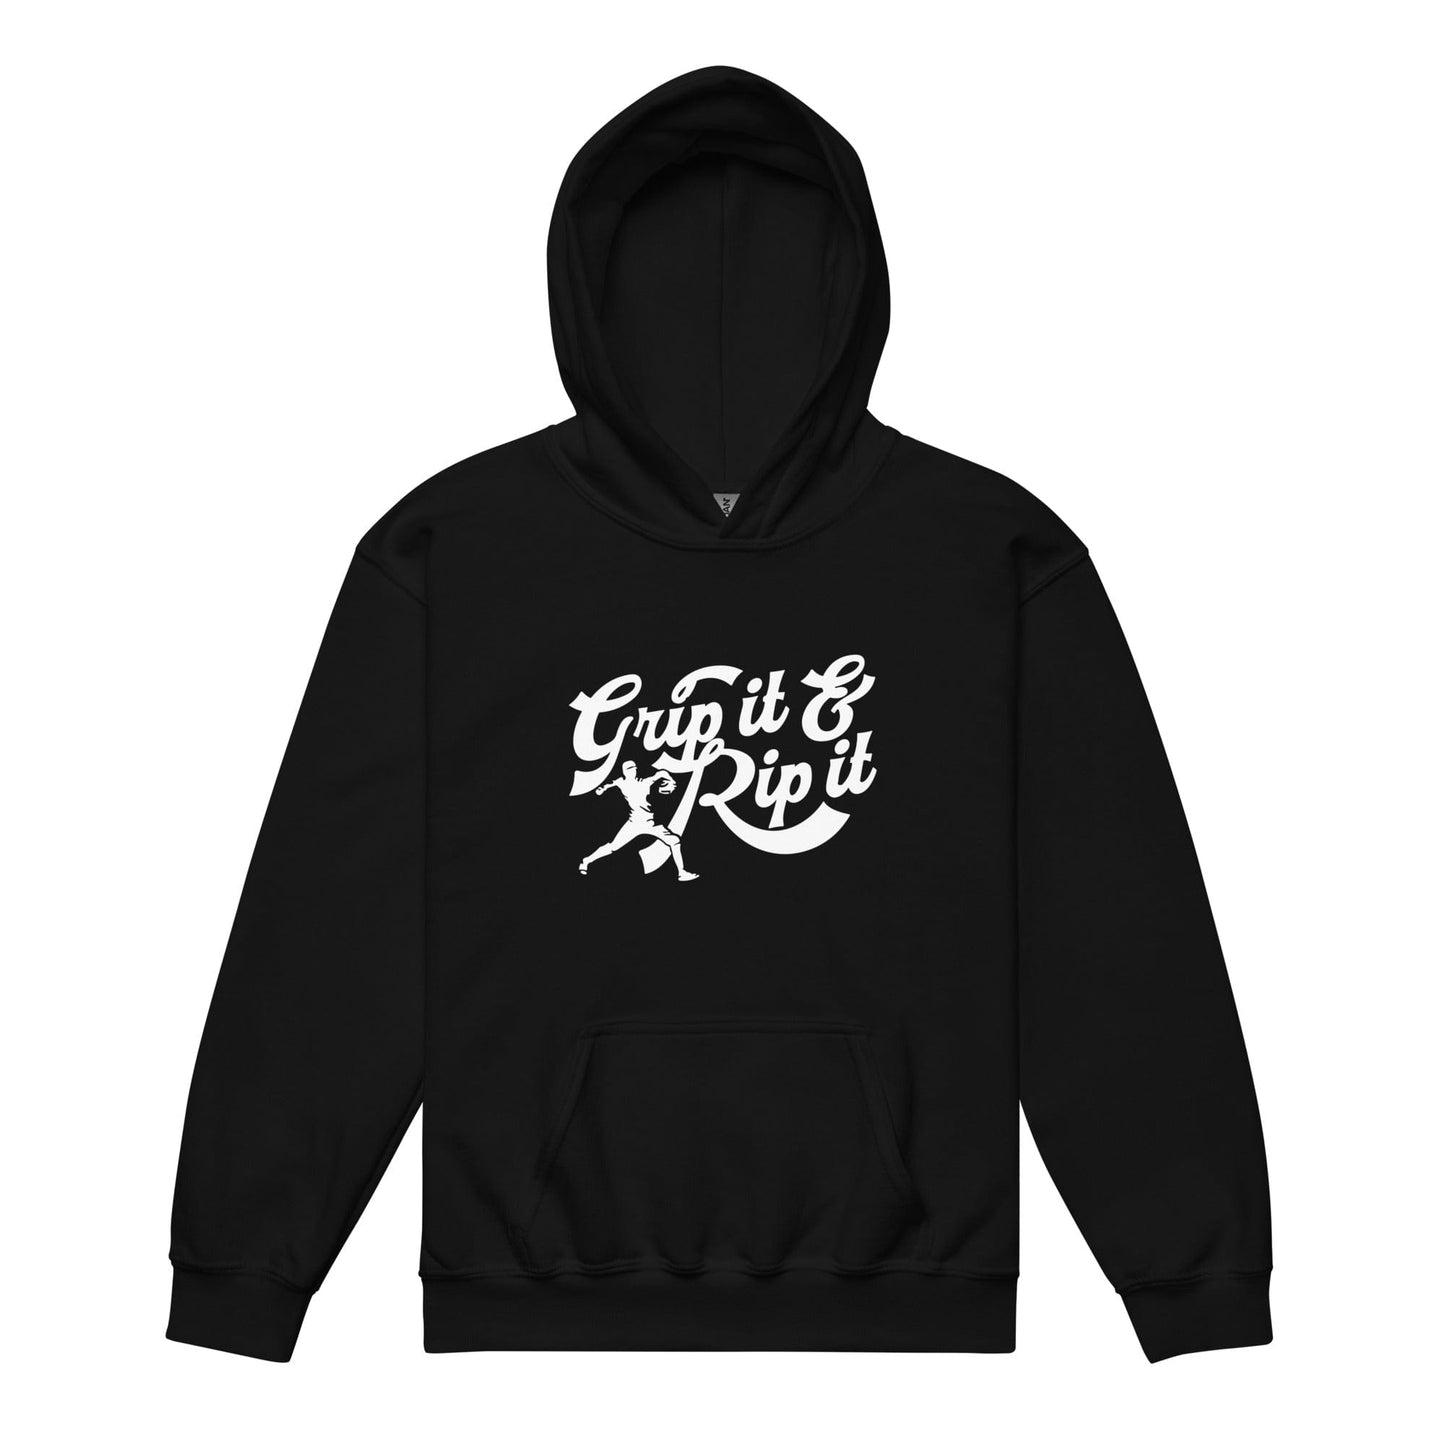 Grip It And Rip It - Youth Hoodie